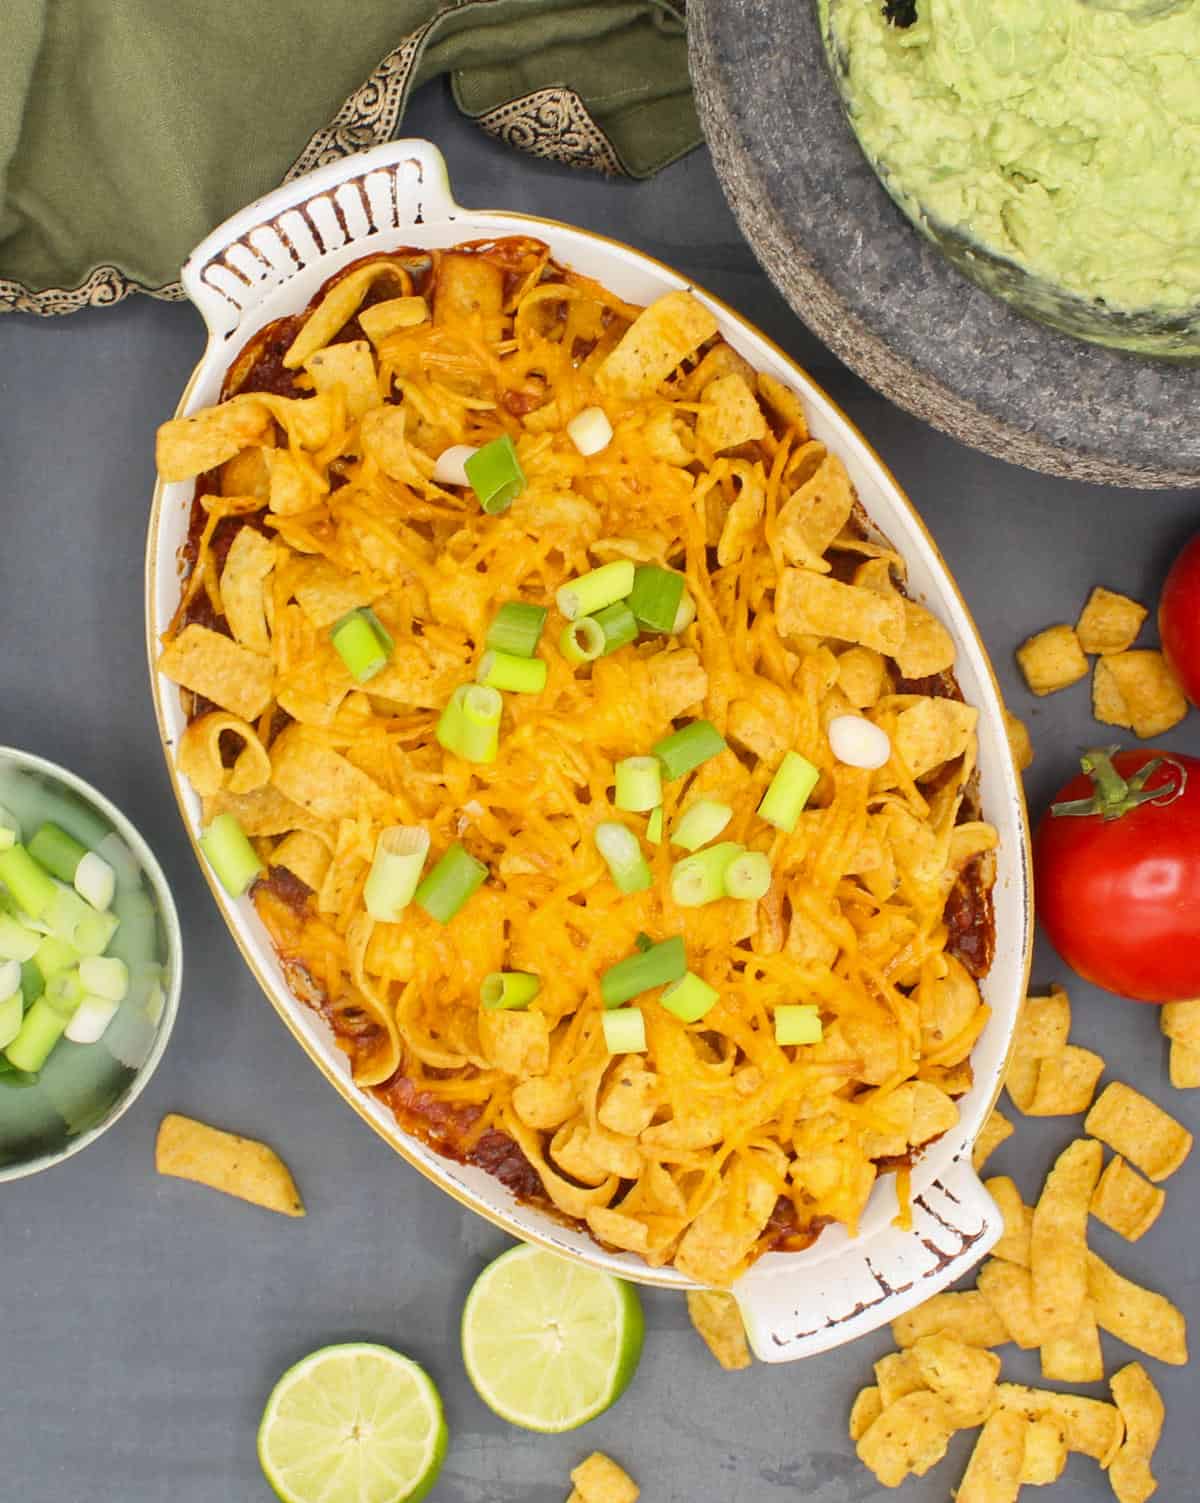 Vegan Frito pie in baking dish with scallions, tomatoes and guacamole.